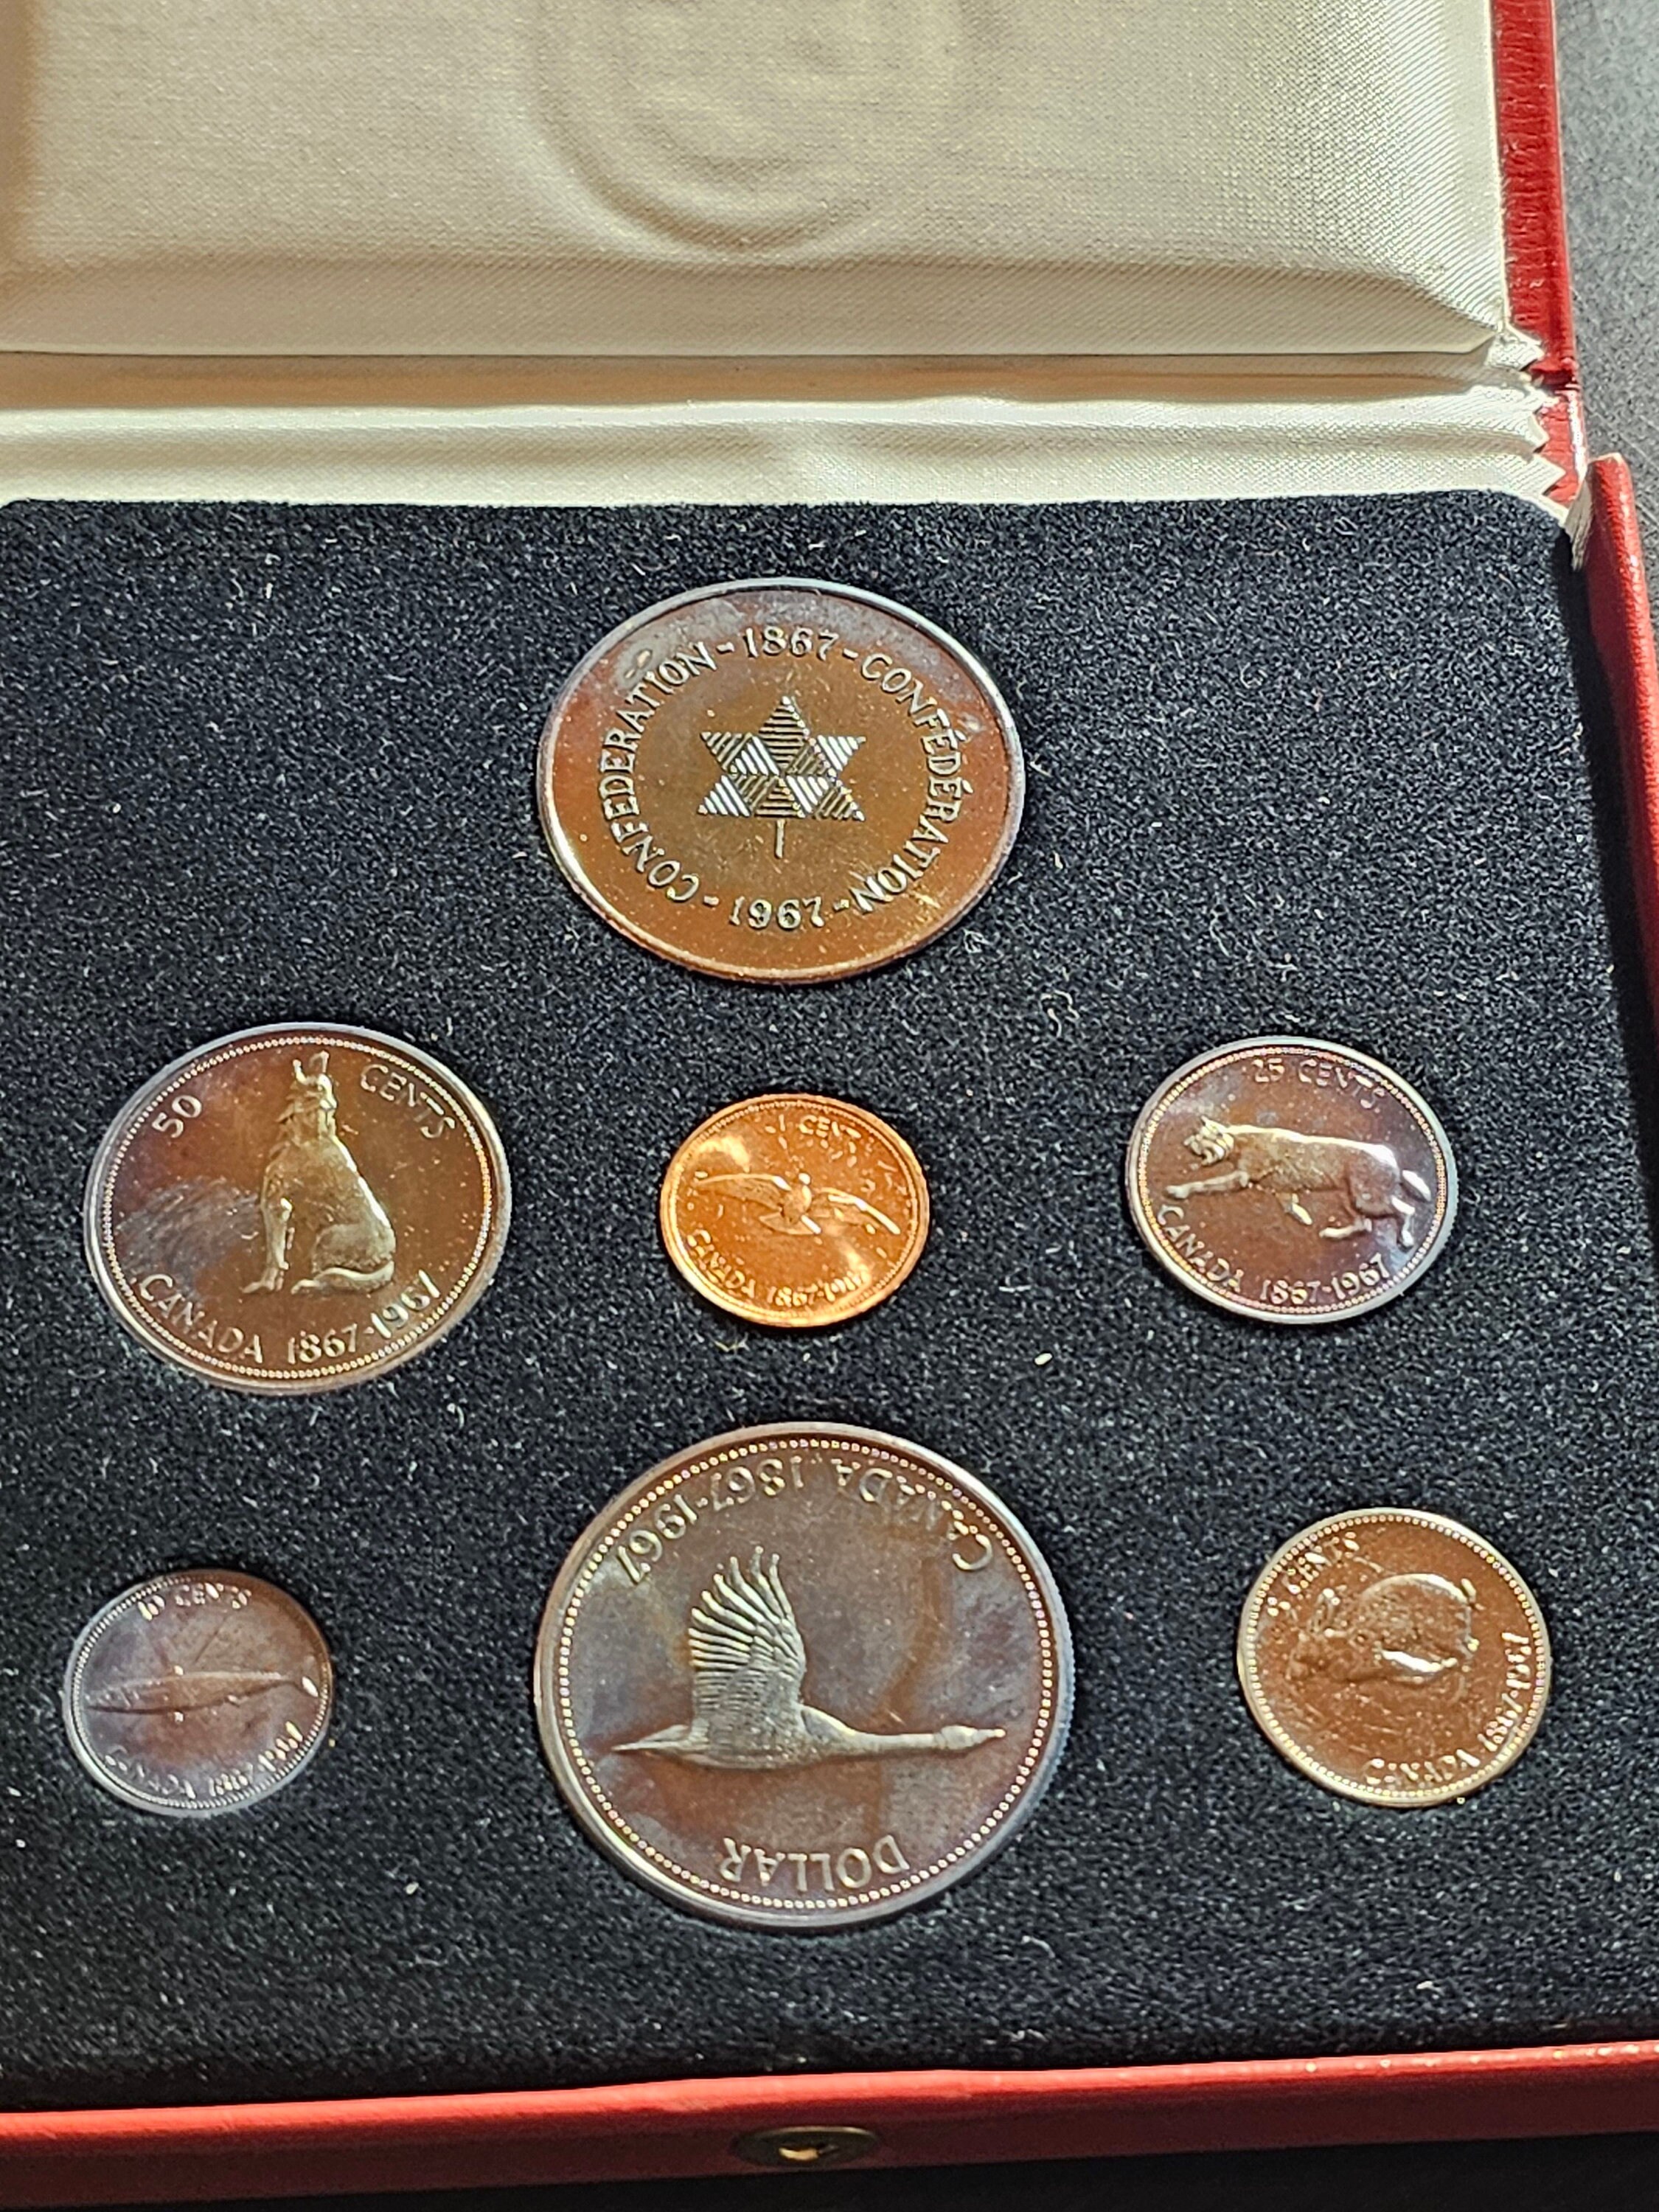 Coins and Canada - 1 cent 1887 - Proof, Proof-like, Specimen, Brilliant  uncirculated